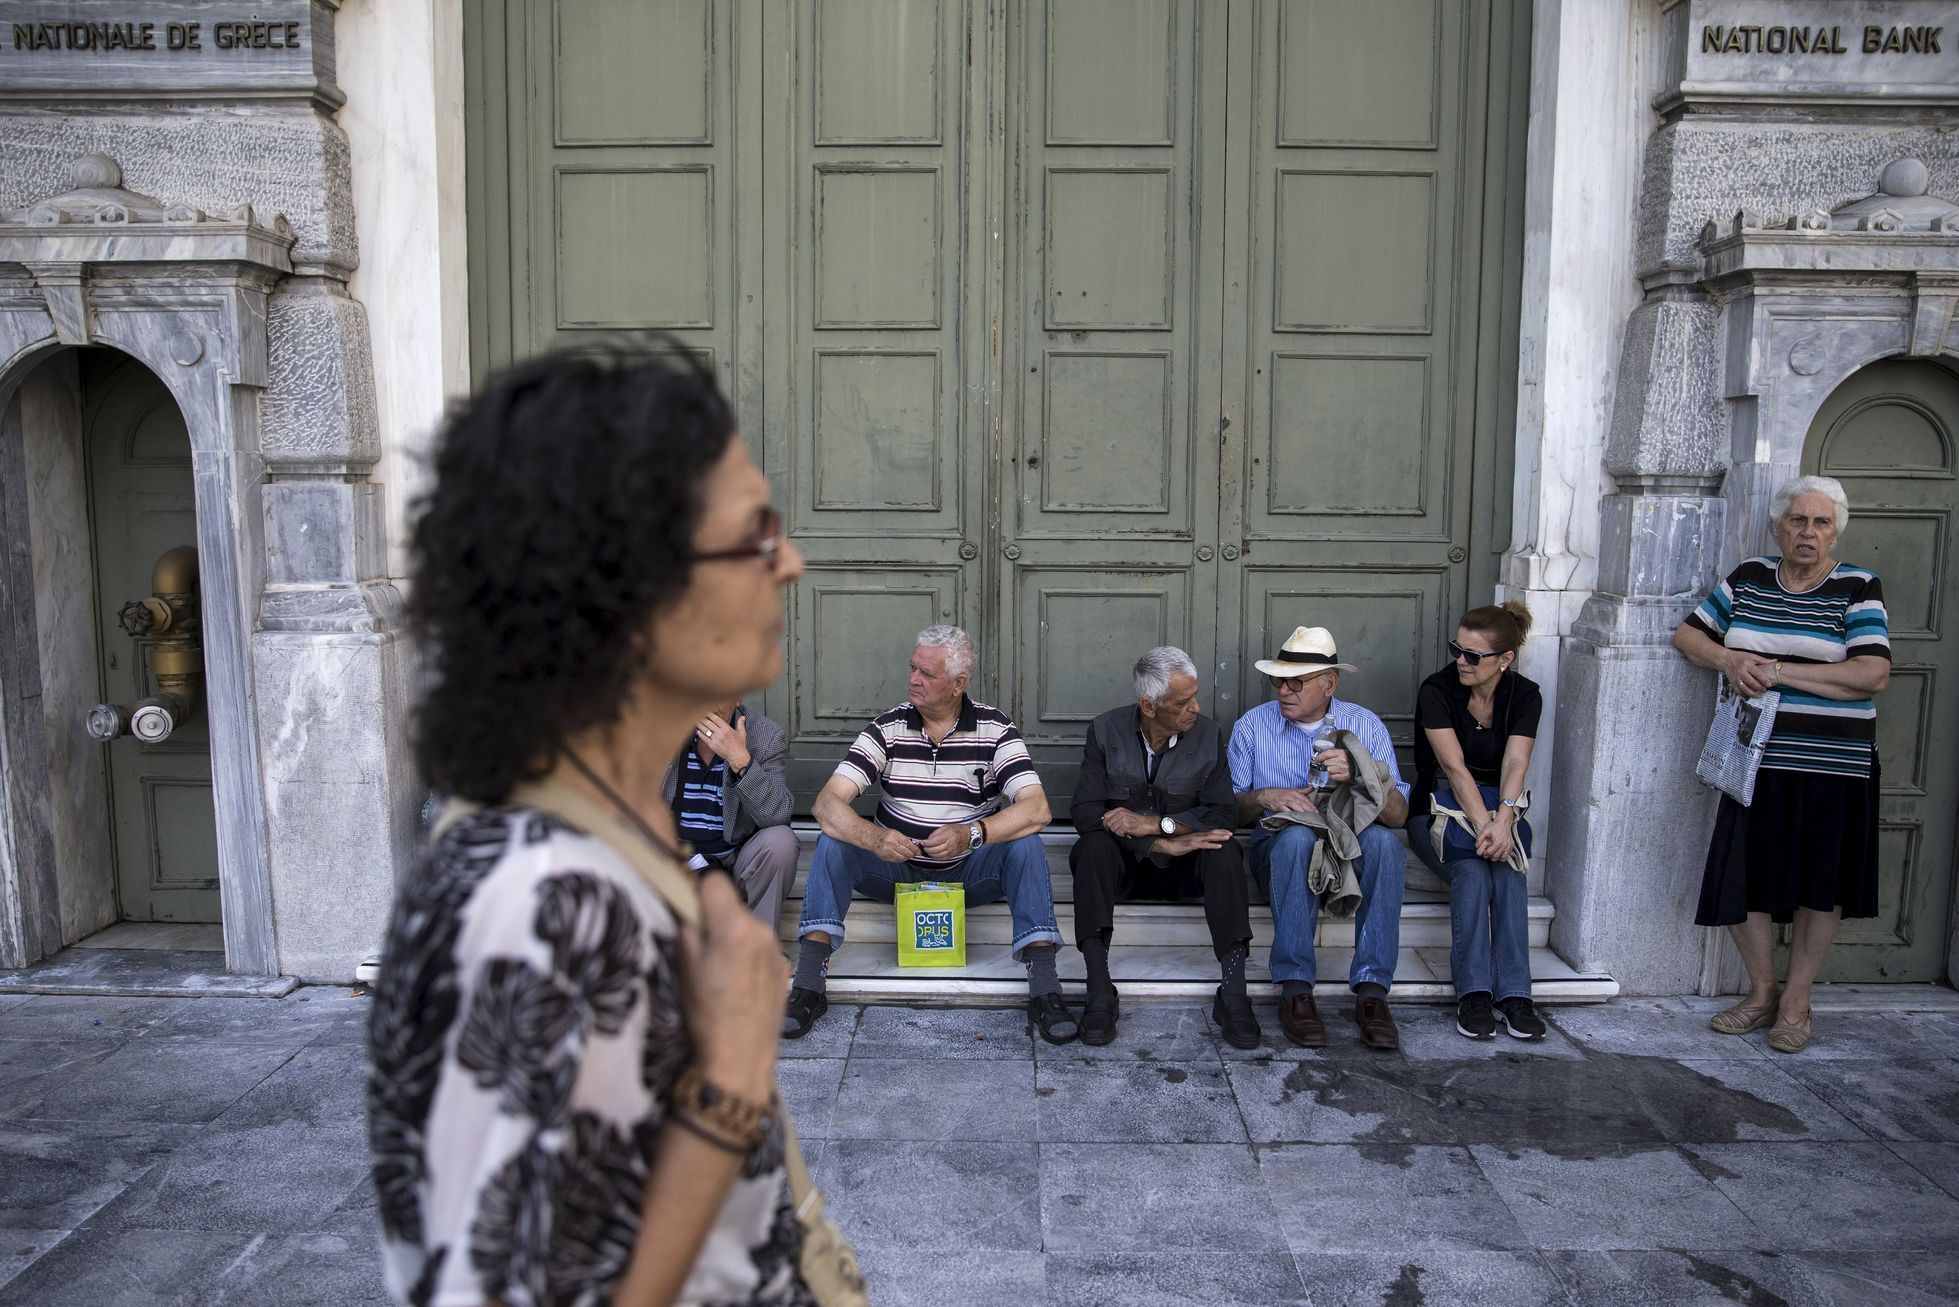 People, most of them pensioners, sit outside a closed National Bank branch at the bank's headquarters in Athens